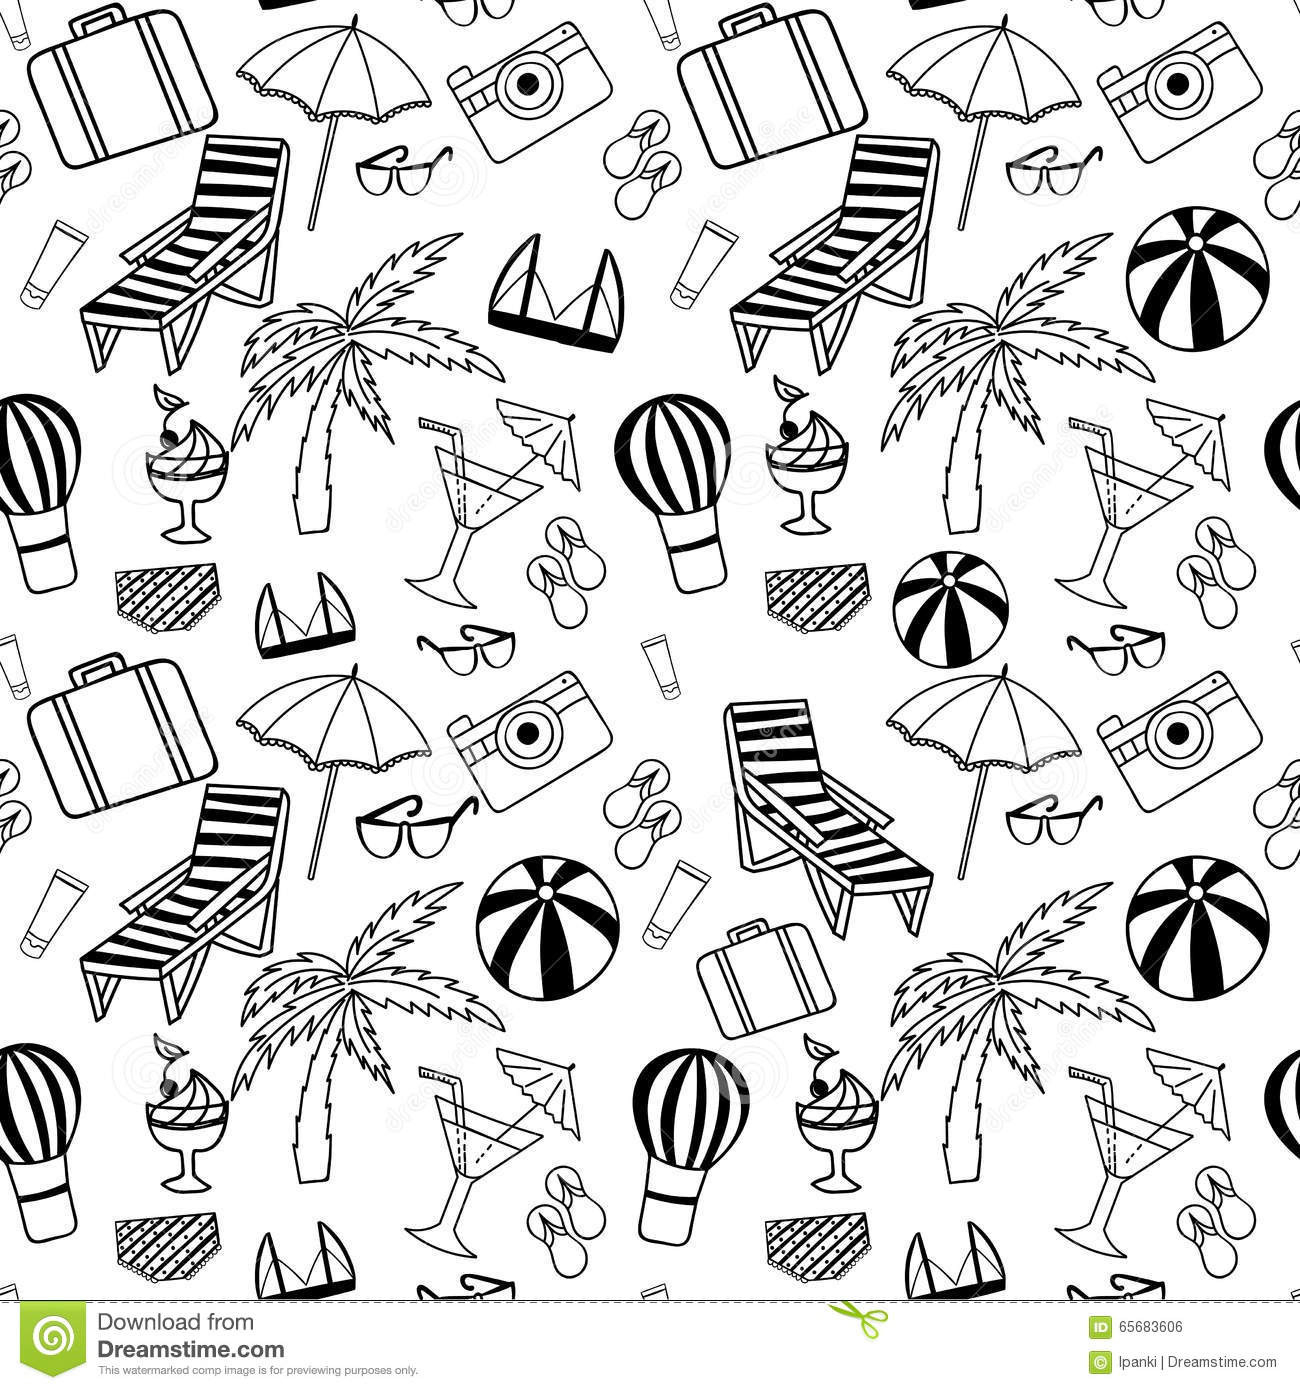 Interactive Coloring Pages Coloring Arts 55 Extraordinary Interactive Coloring Pages